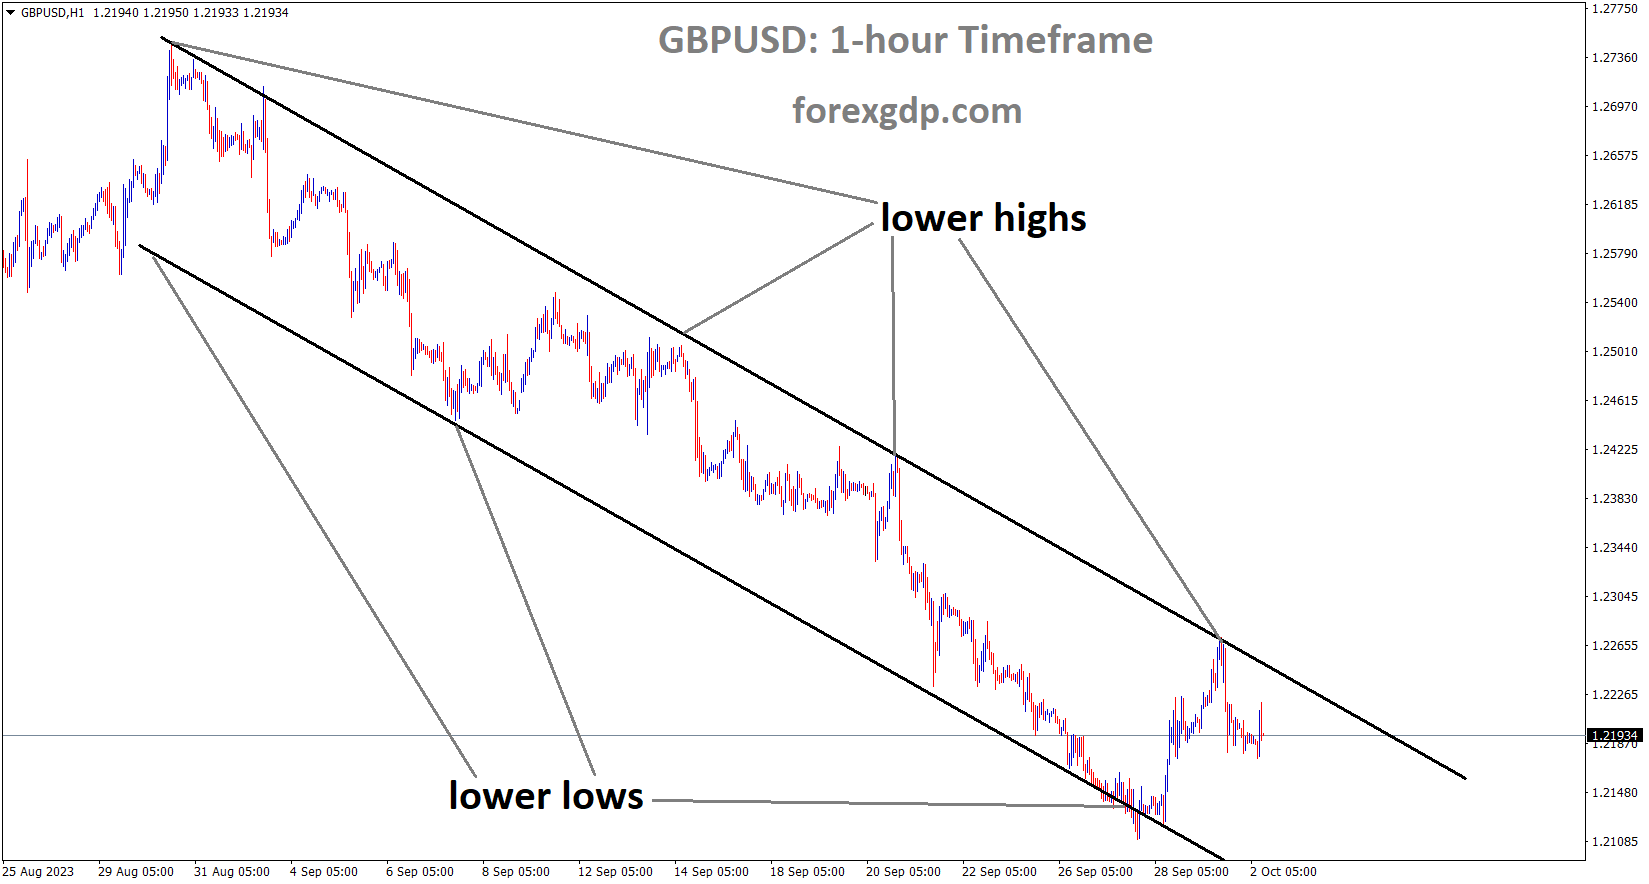 GBPUSD is moving in the Descending channel and the market has fallen from the lower high area of the channel